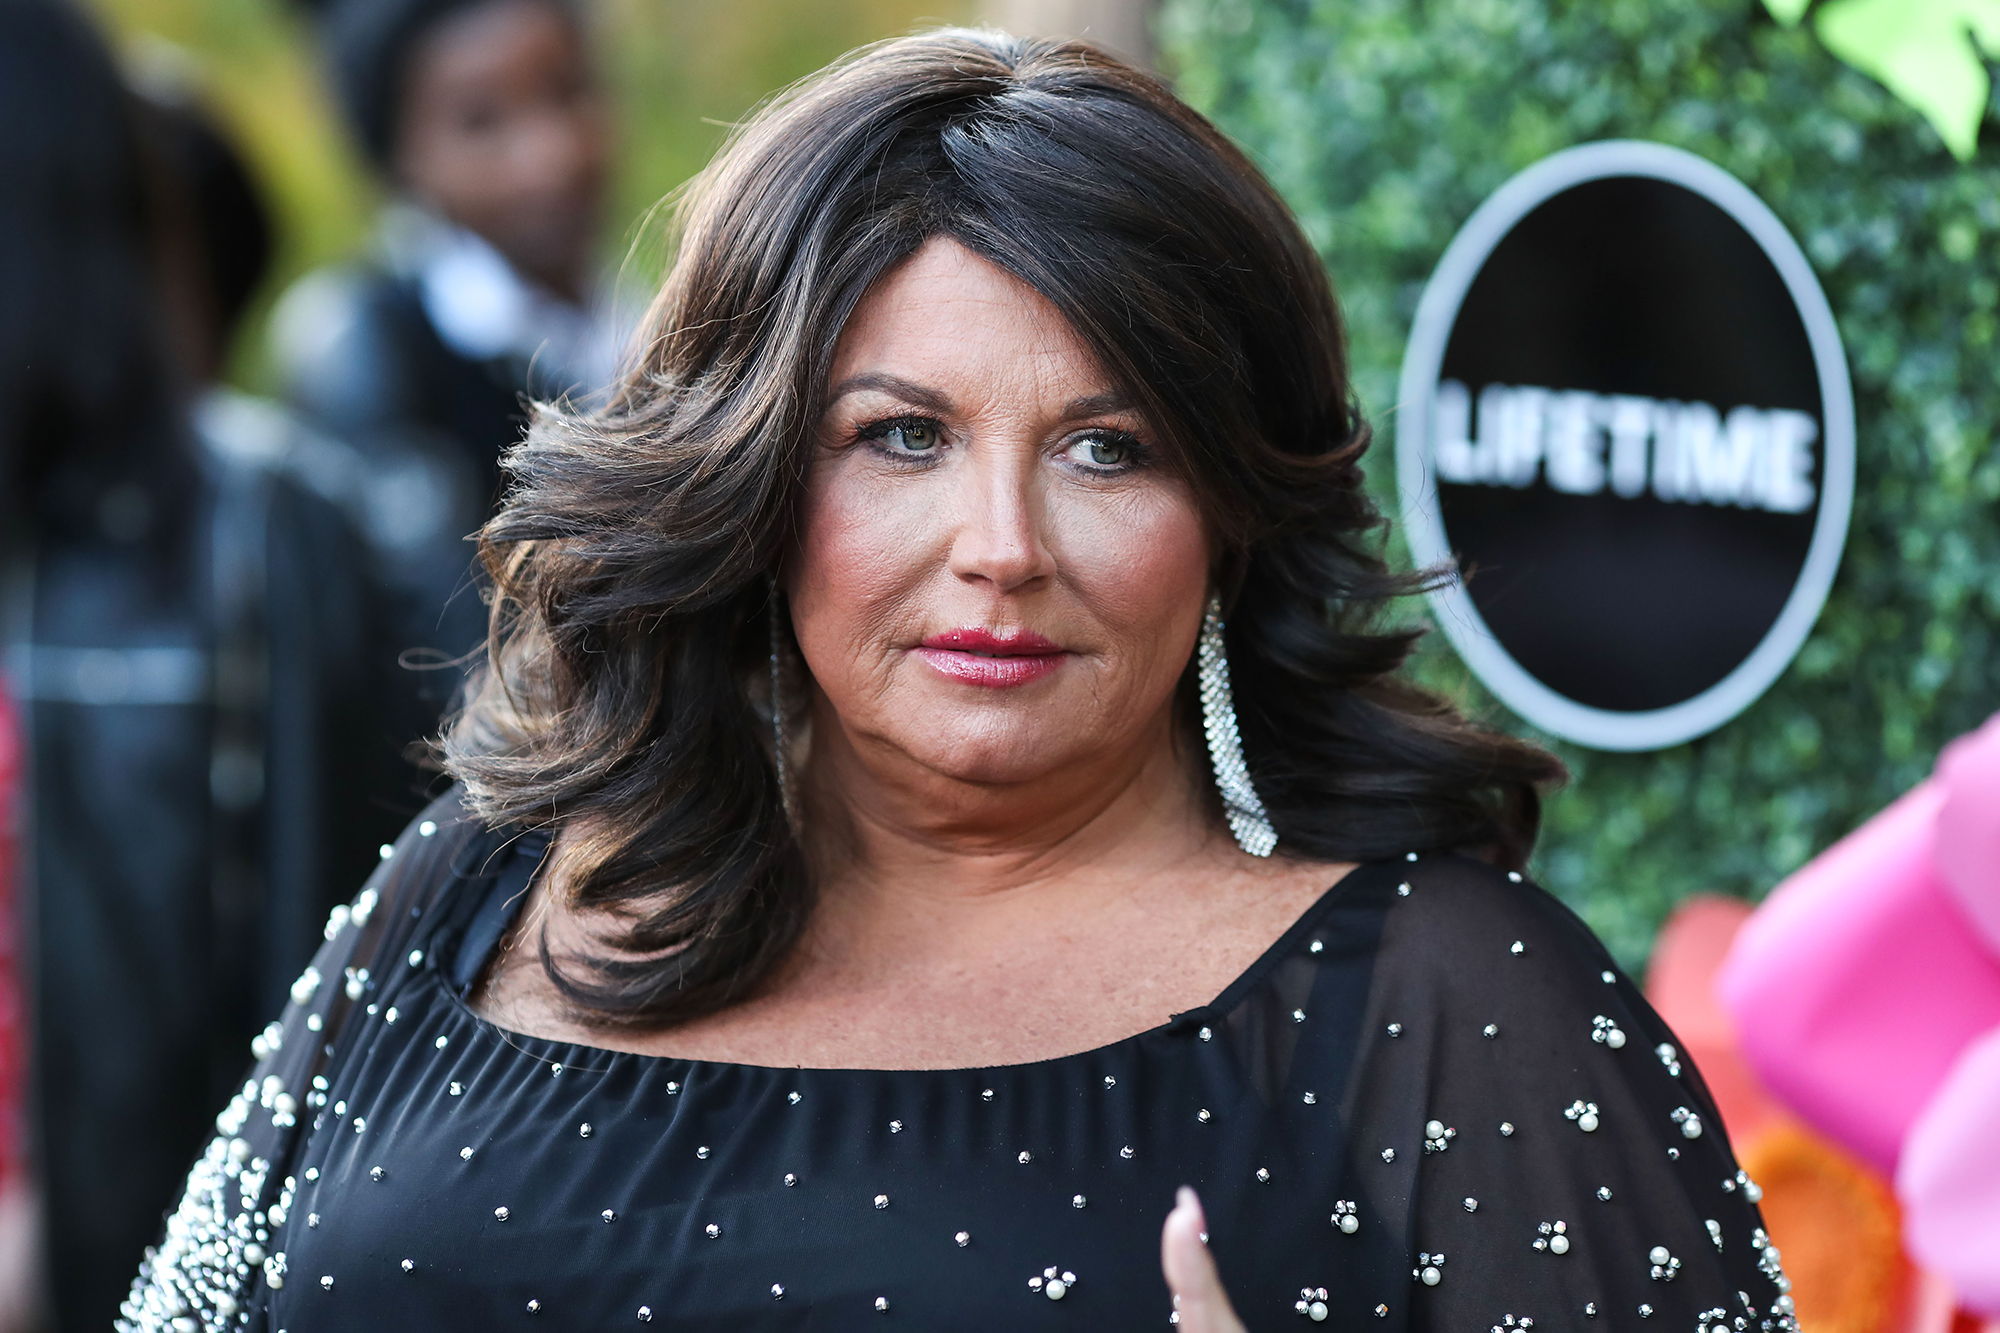 Abby Lee Miller reality show cancelled after racism accusations